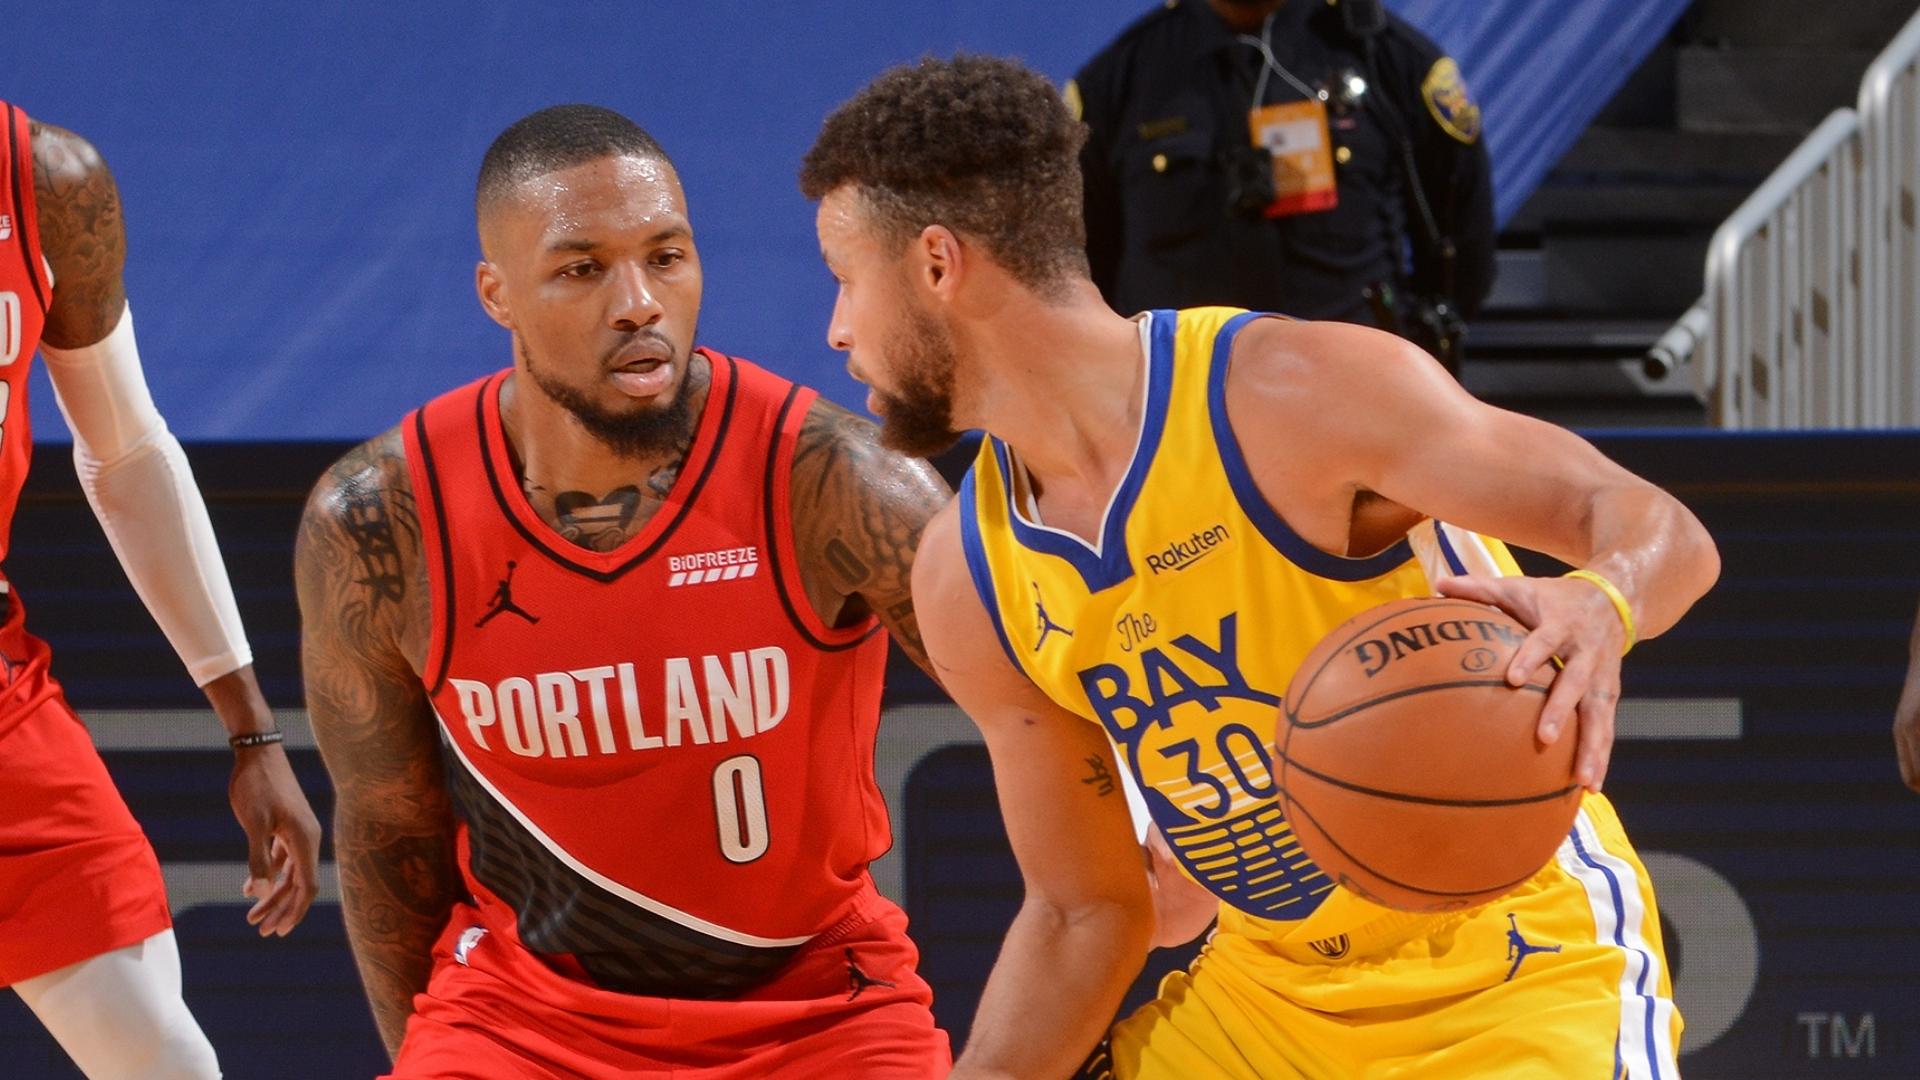 Are Stephen Curry and Damian Lillard playing tonight? TV channel, live streams, time for Warriors vs. Blazers Friday NBA game